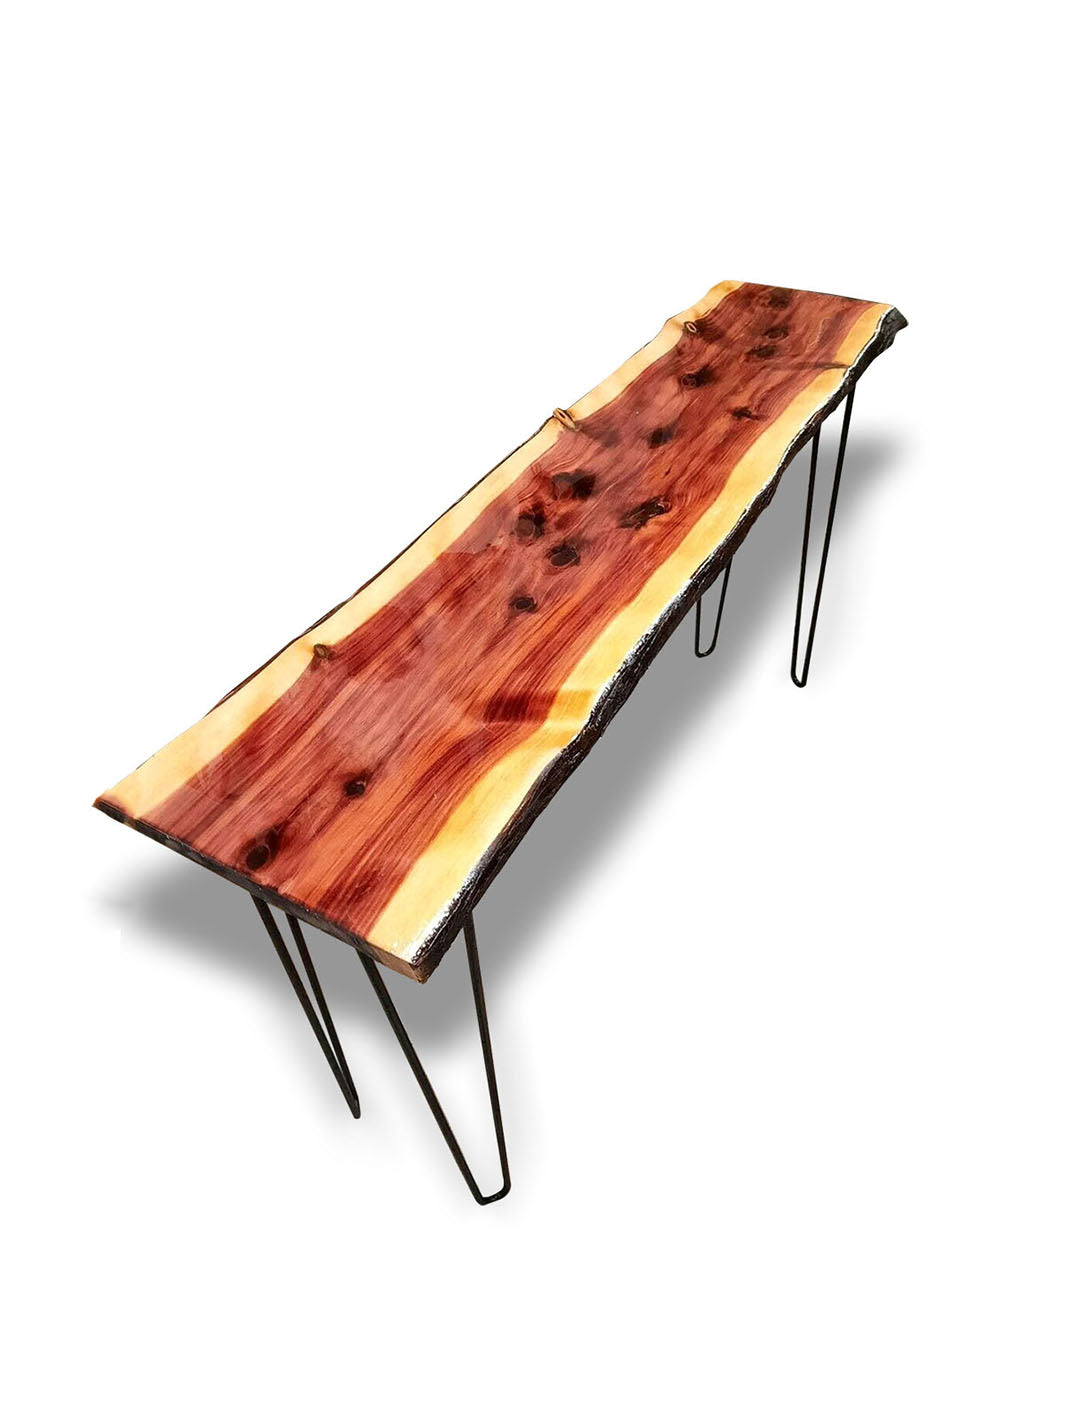 Handcrafted Epoxy River Red Cedar Live Edge Entryway Table